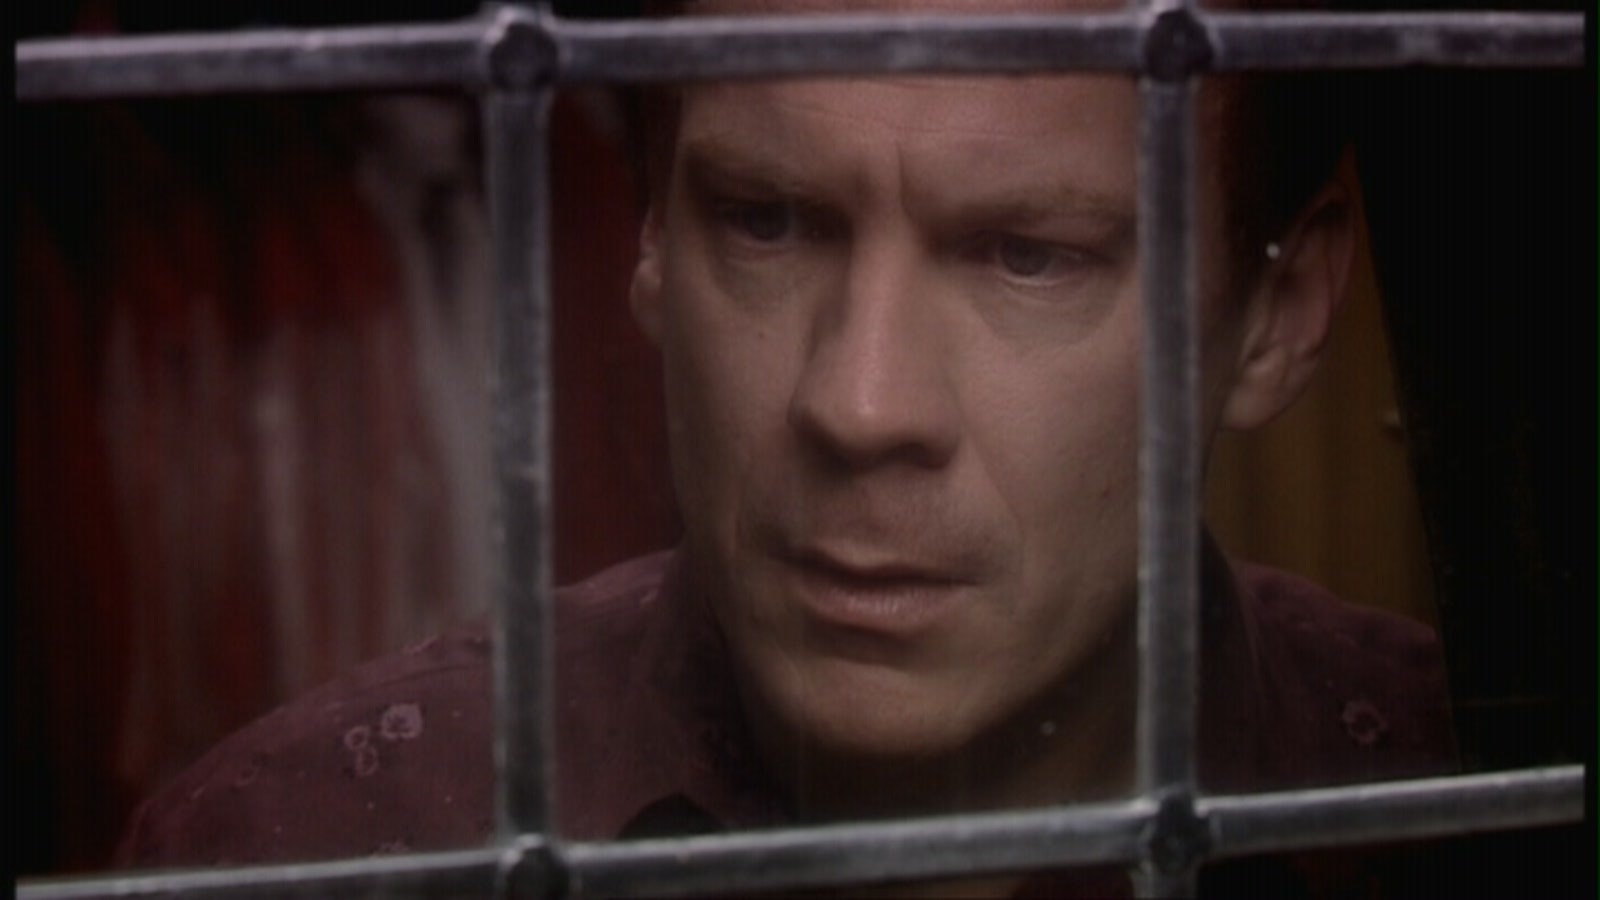 Screencap from Father's Day: the face of Pete, staring through a frosted-glass window. He looks shocked, or maybe like he's realizing something.